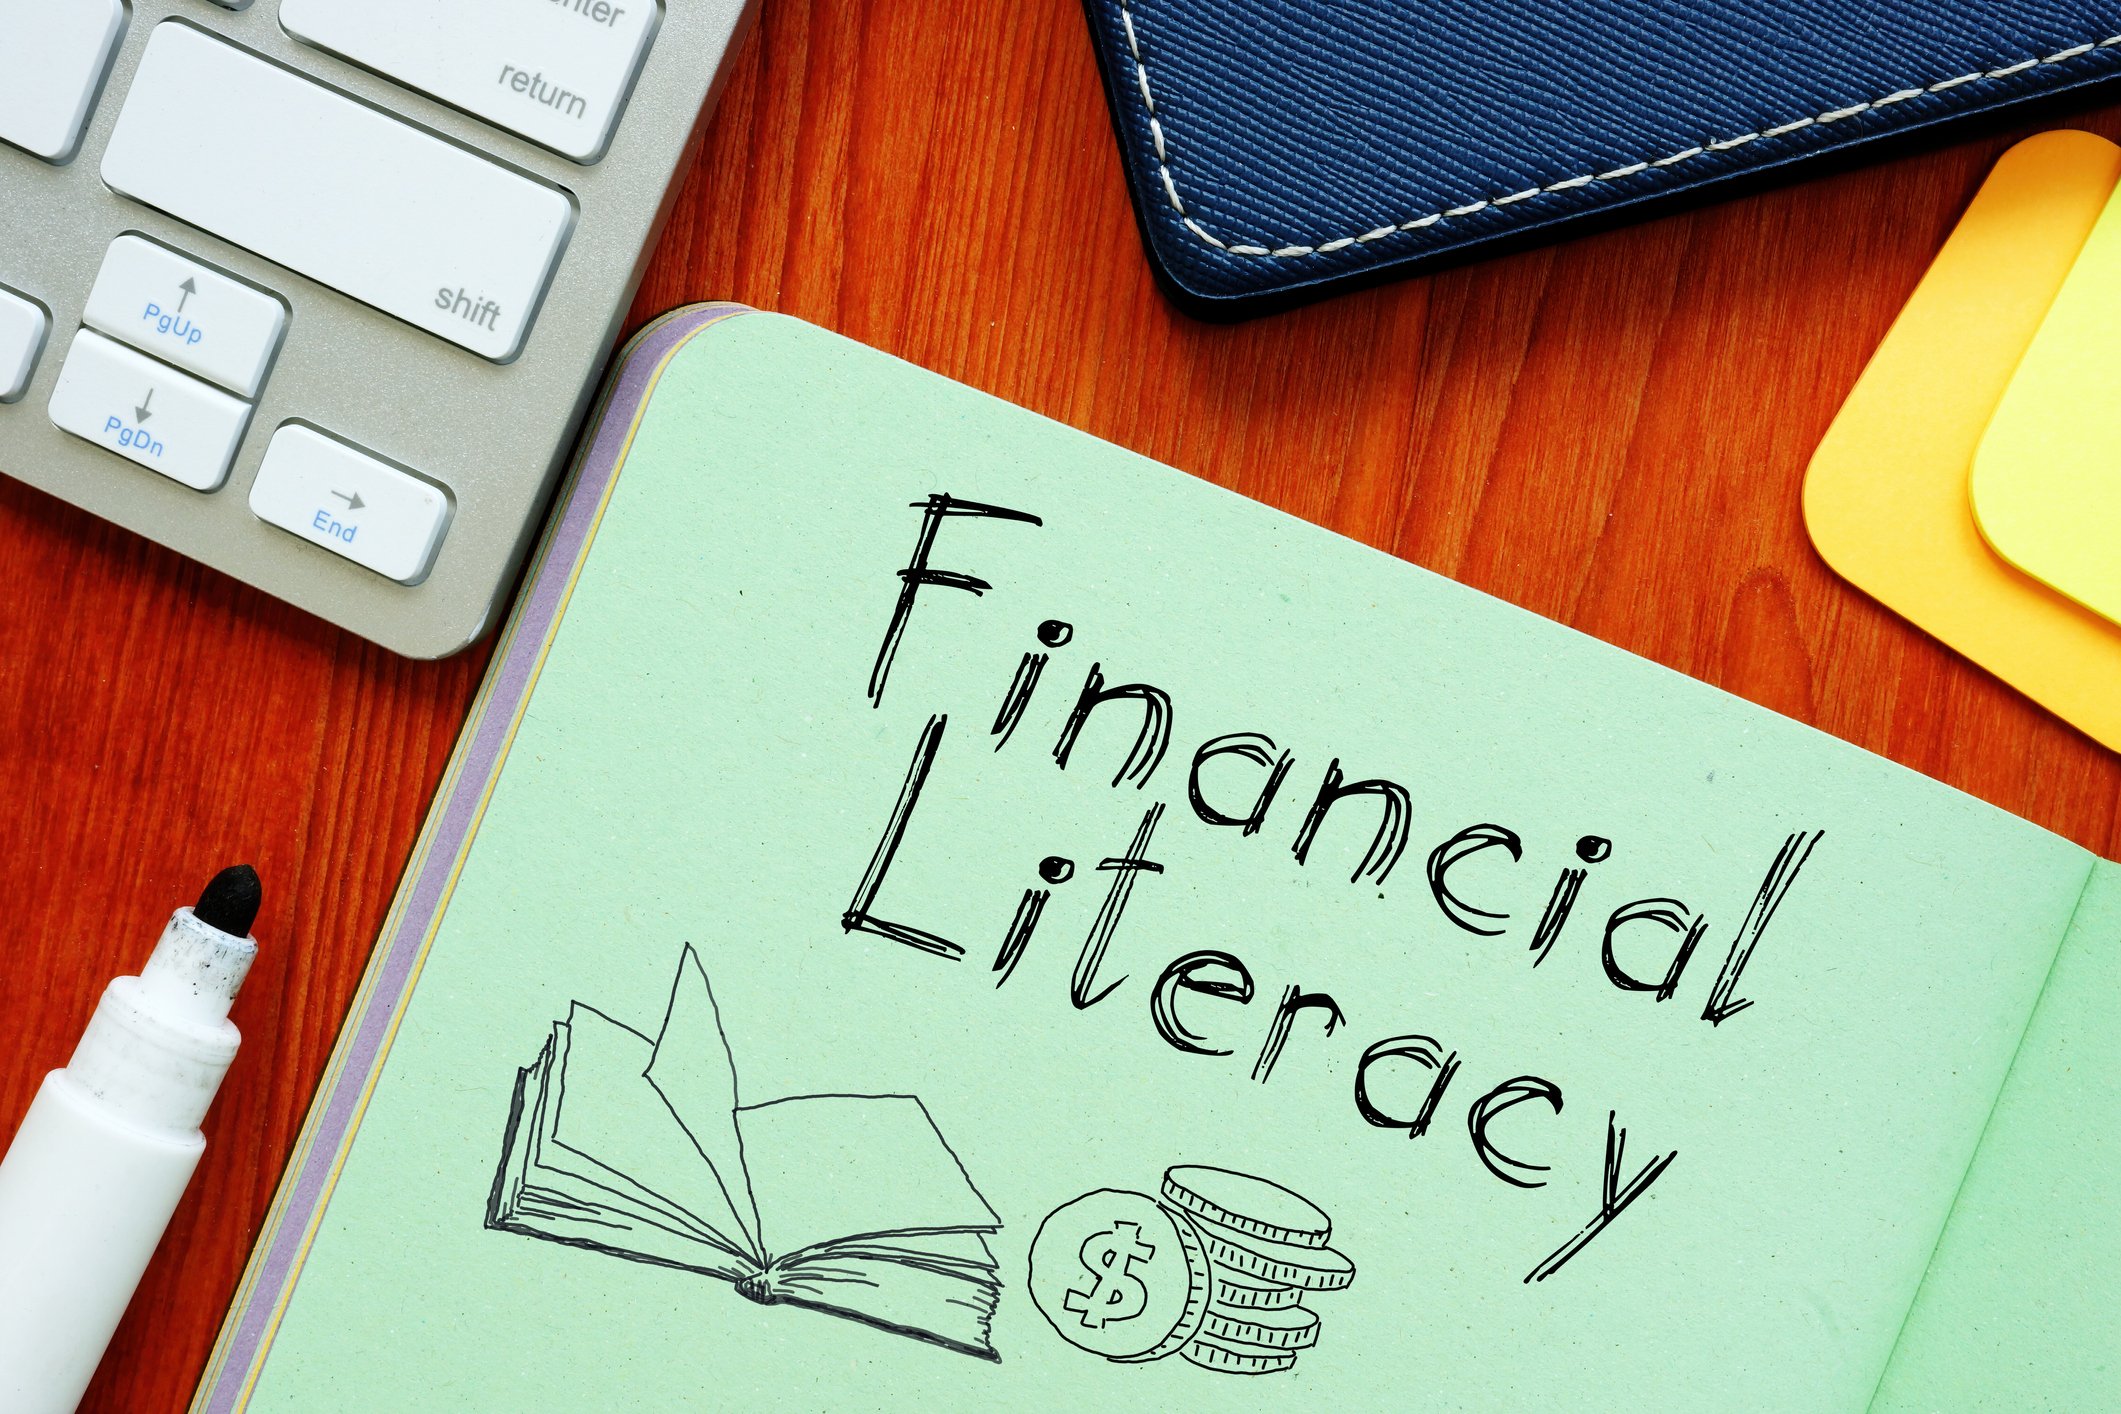 B.A. Schrock Financial Group | Thinking About Retirement? The Basics of Financial Literacy Are Your North Star